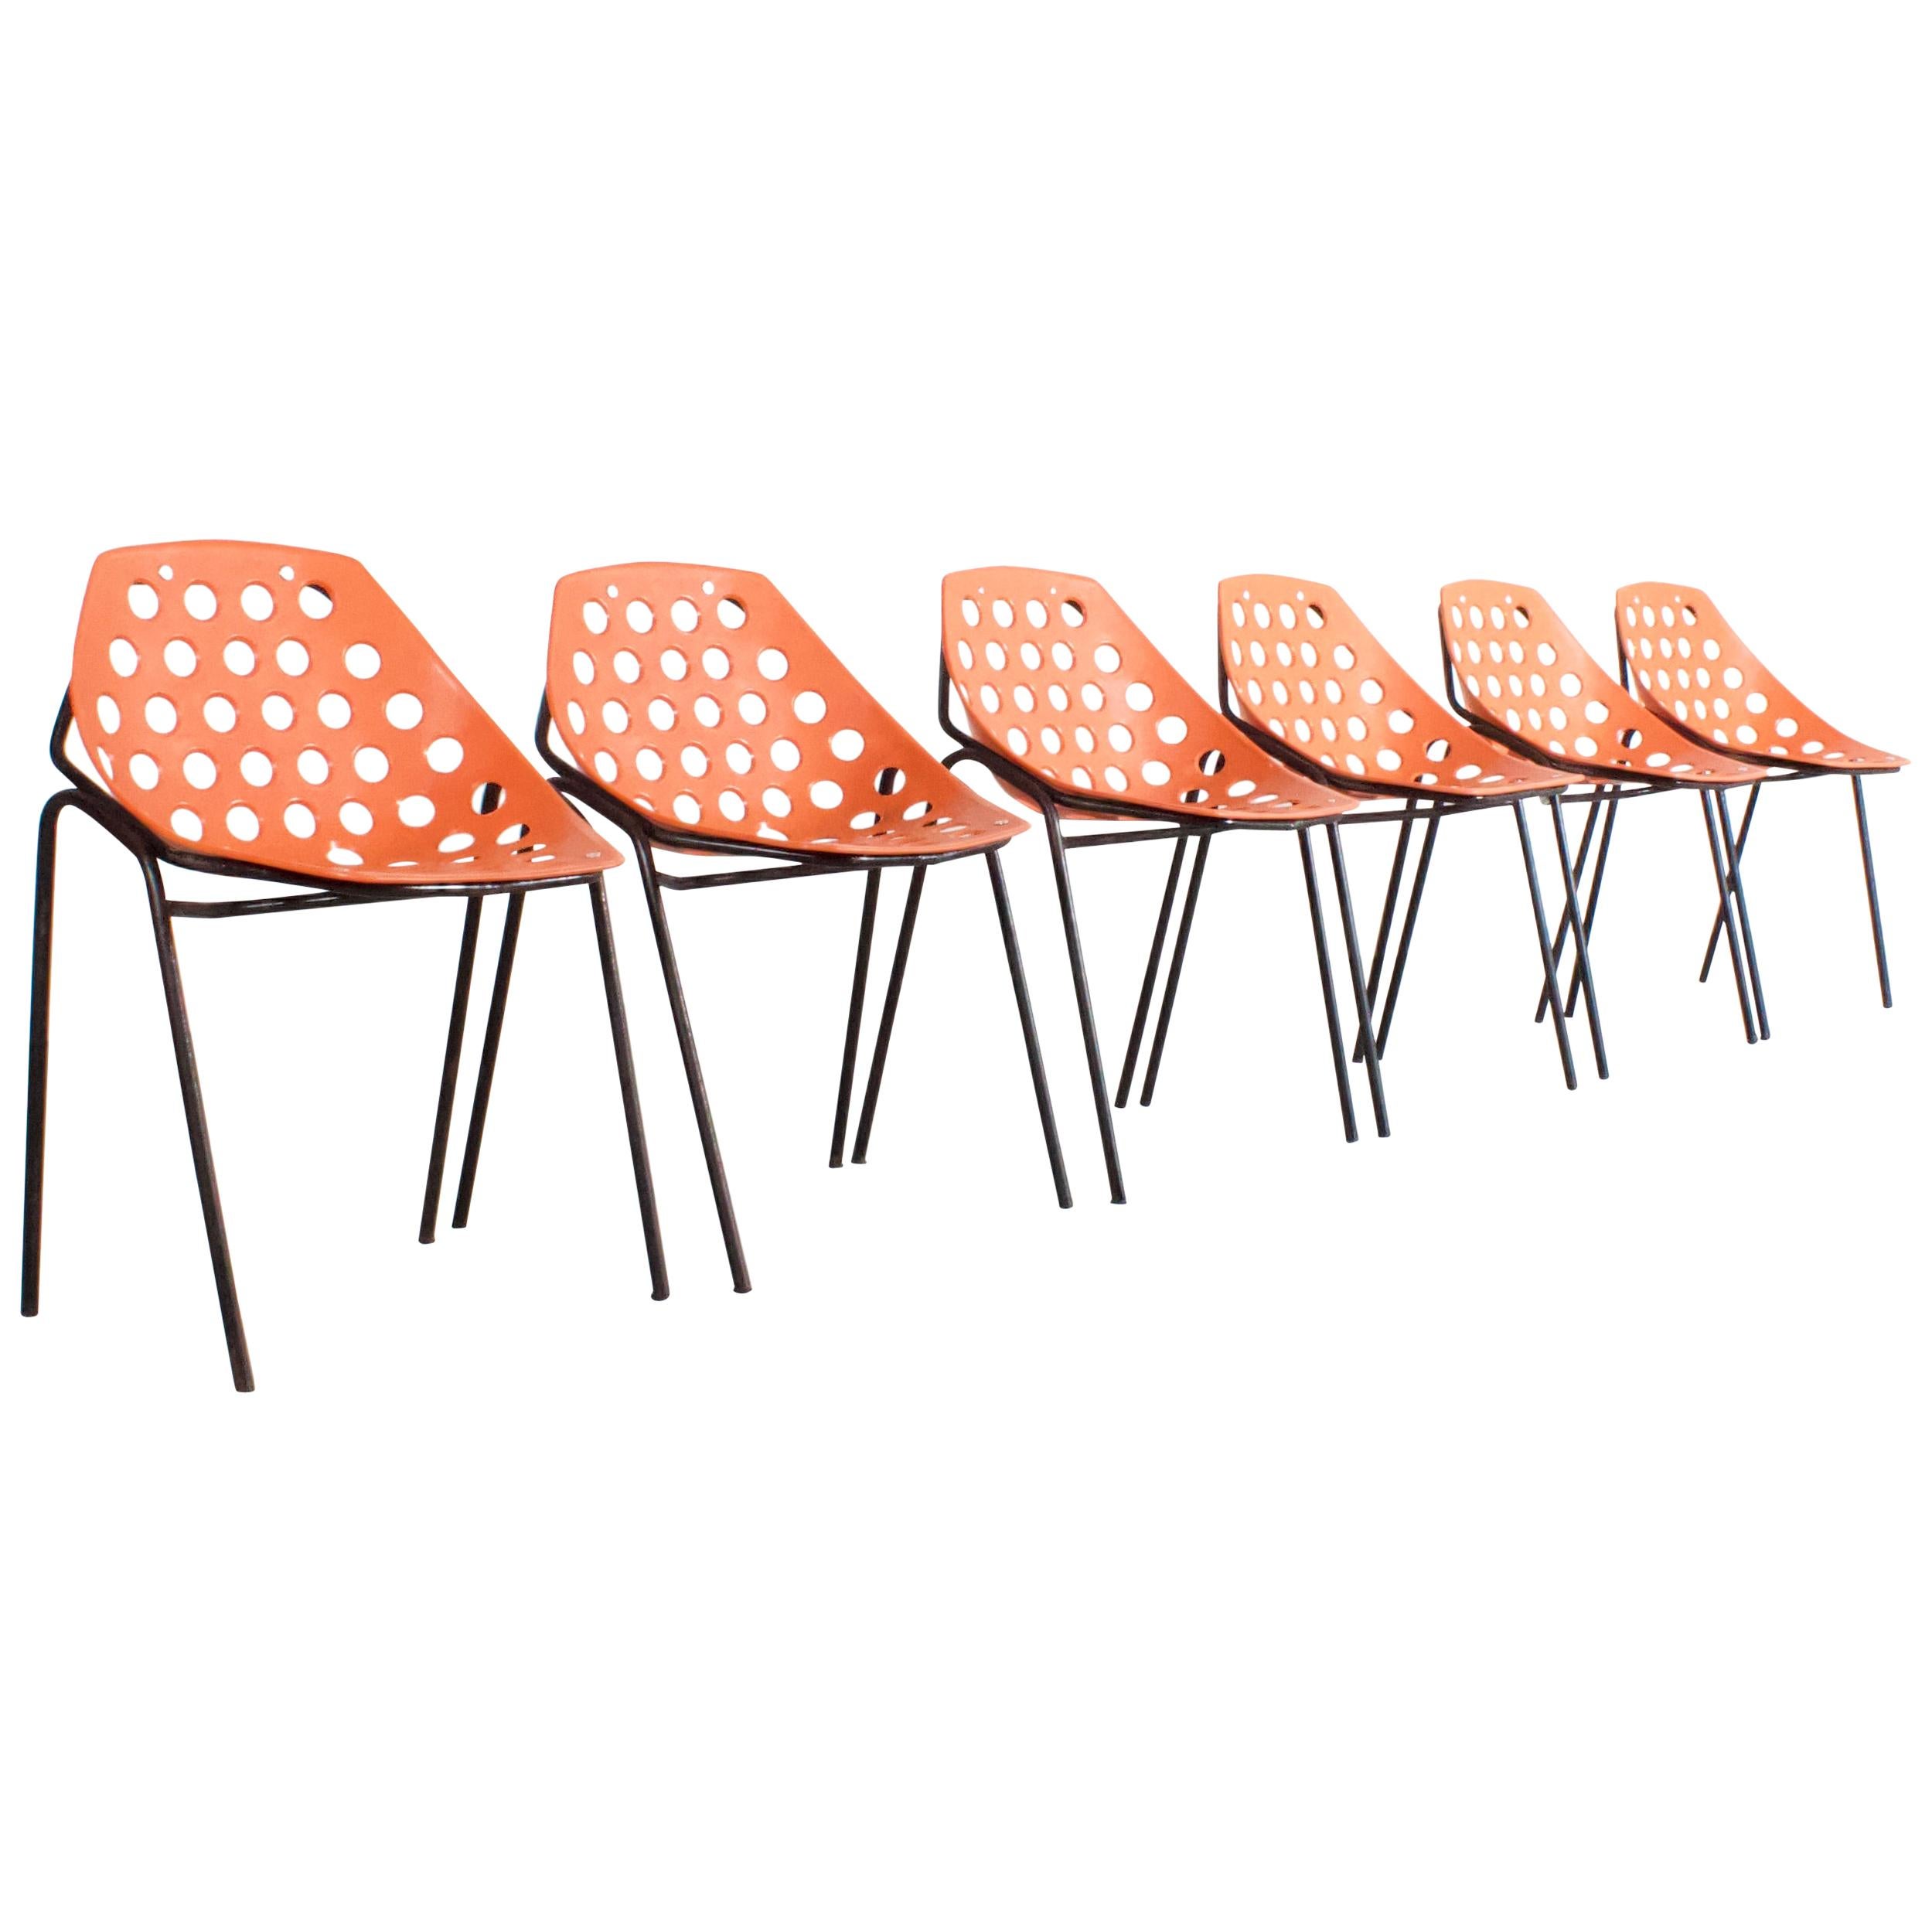 Set of Six ‘Coquillage’ Chairs by Pierre Guariche for Meurop, 1960s